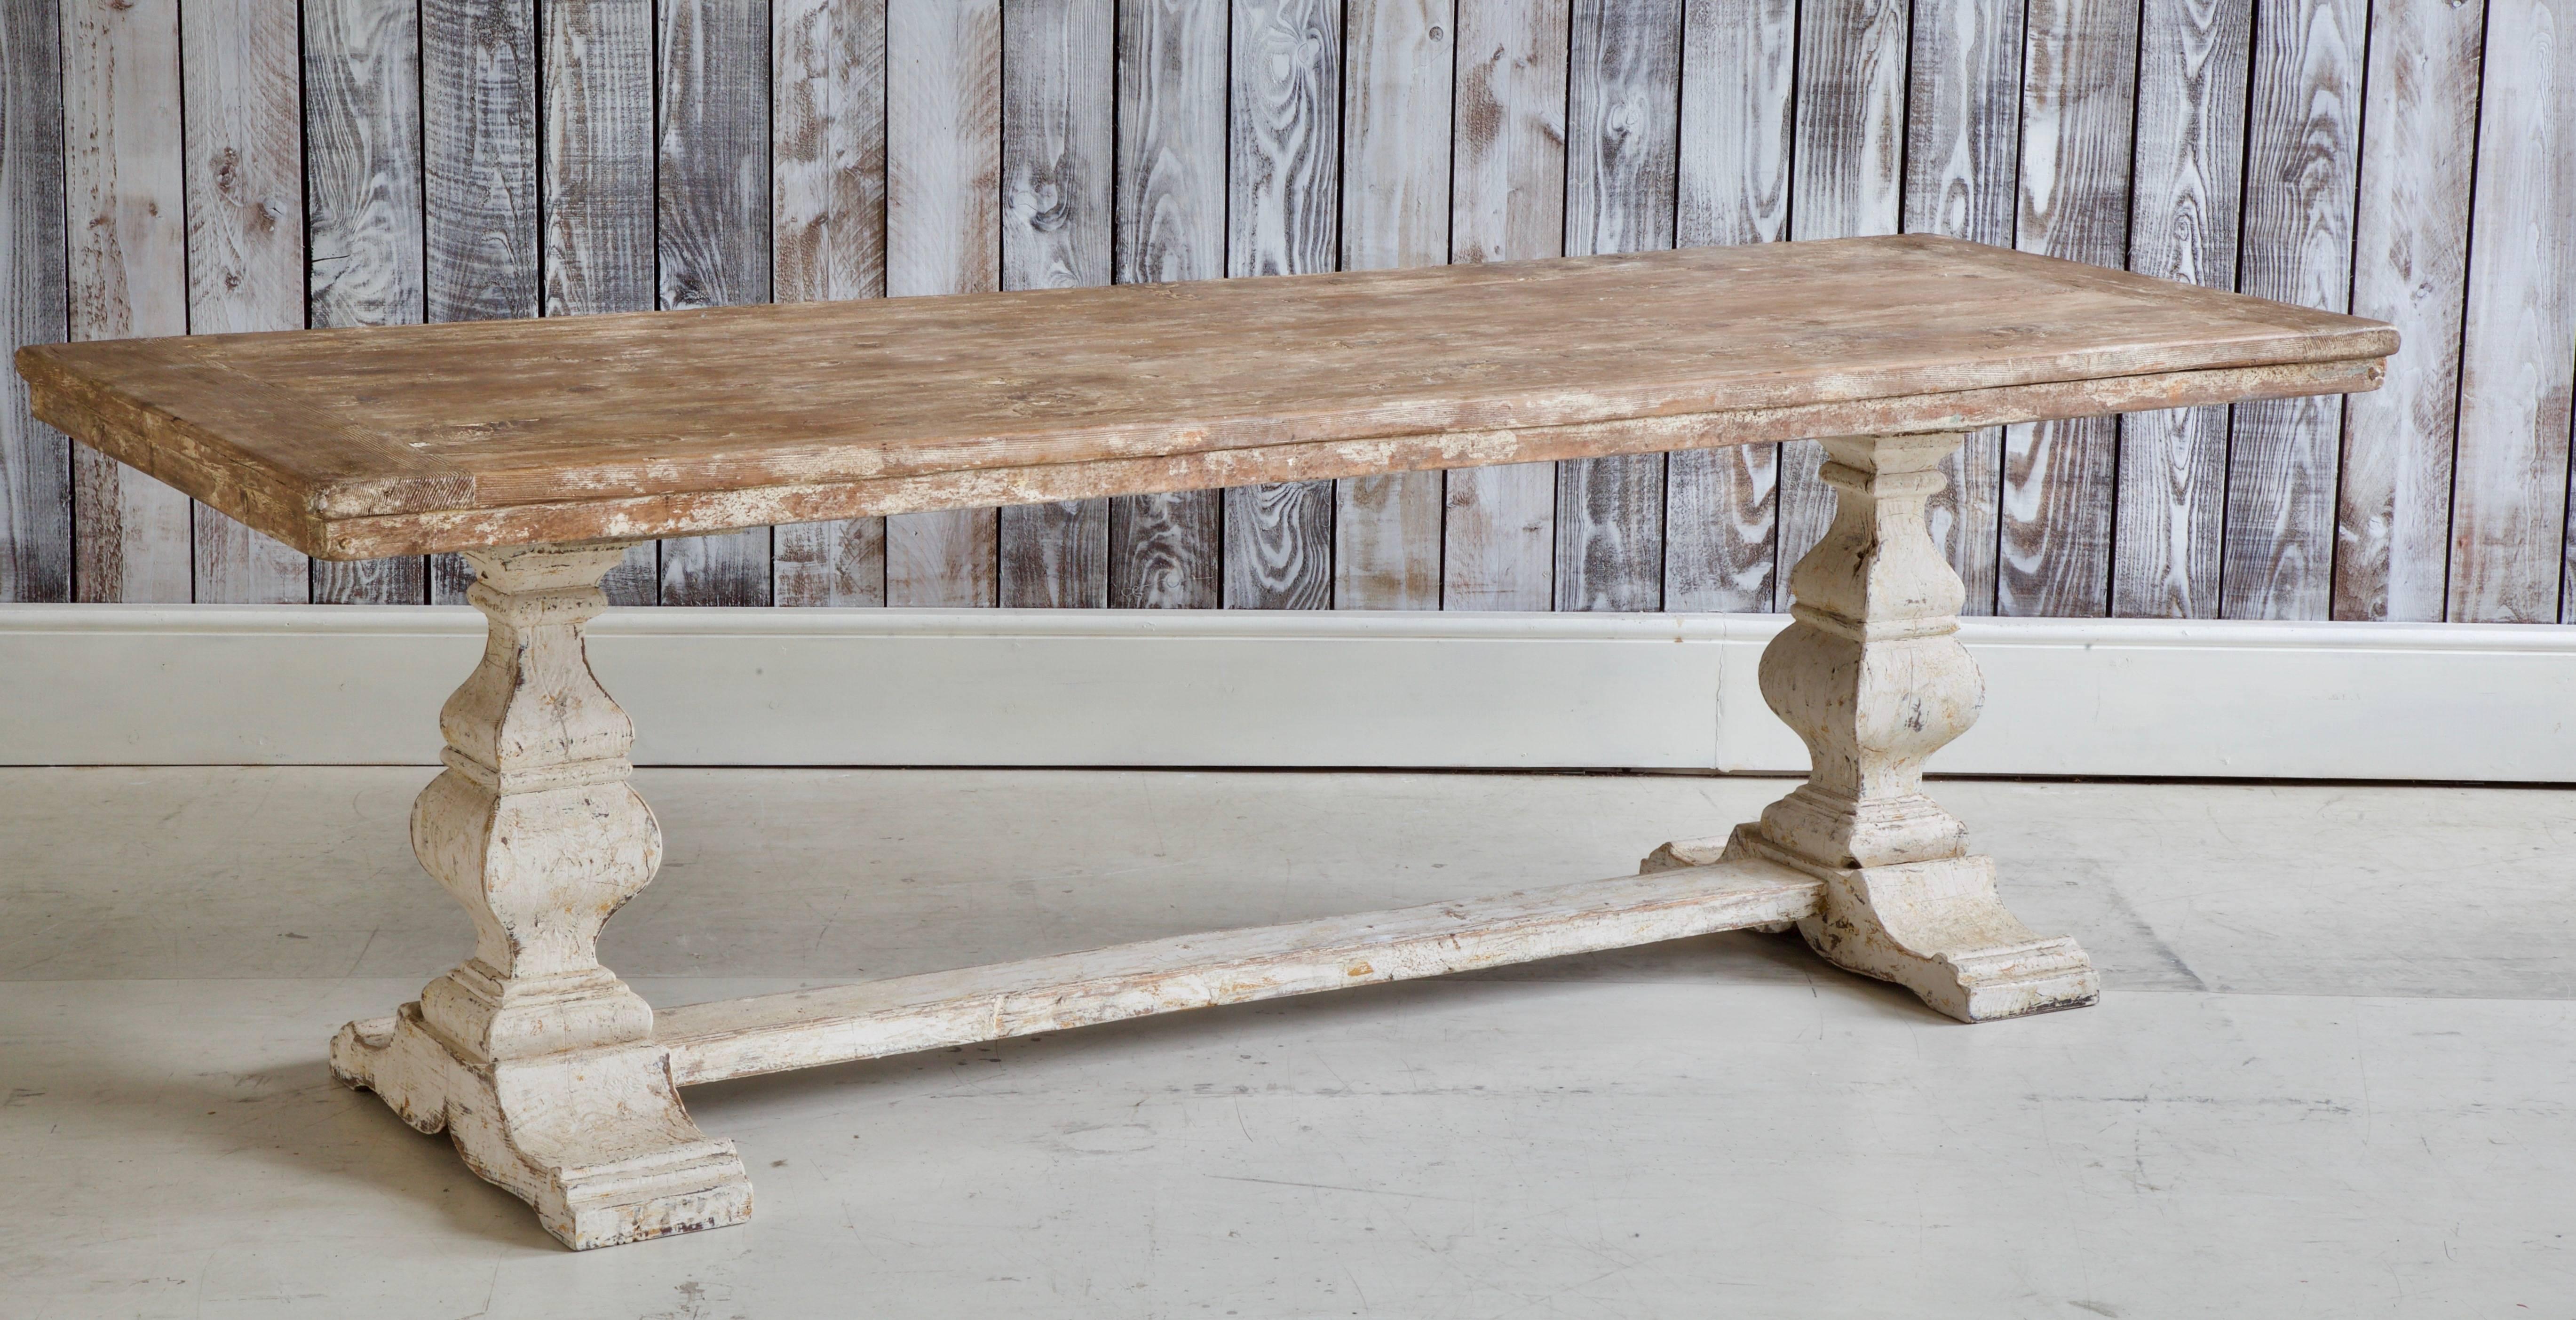 19th century farmhouse trestle table from Tuscany, Italy. Painted with an organic and original patina, wonderfully textured finish in white gesso.